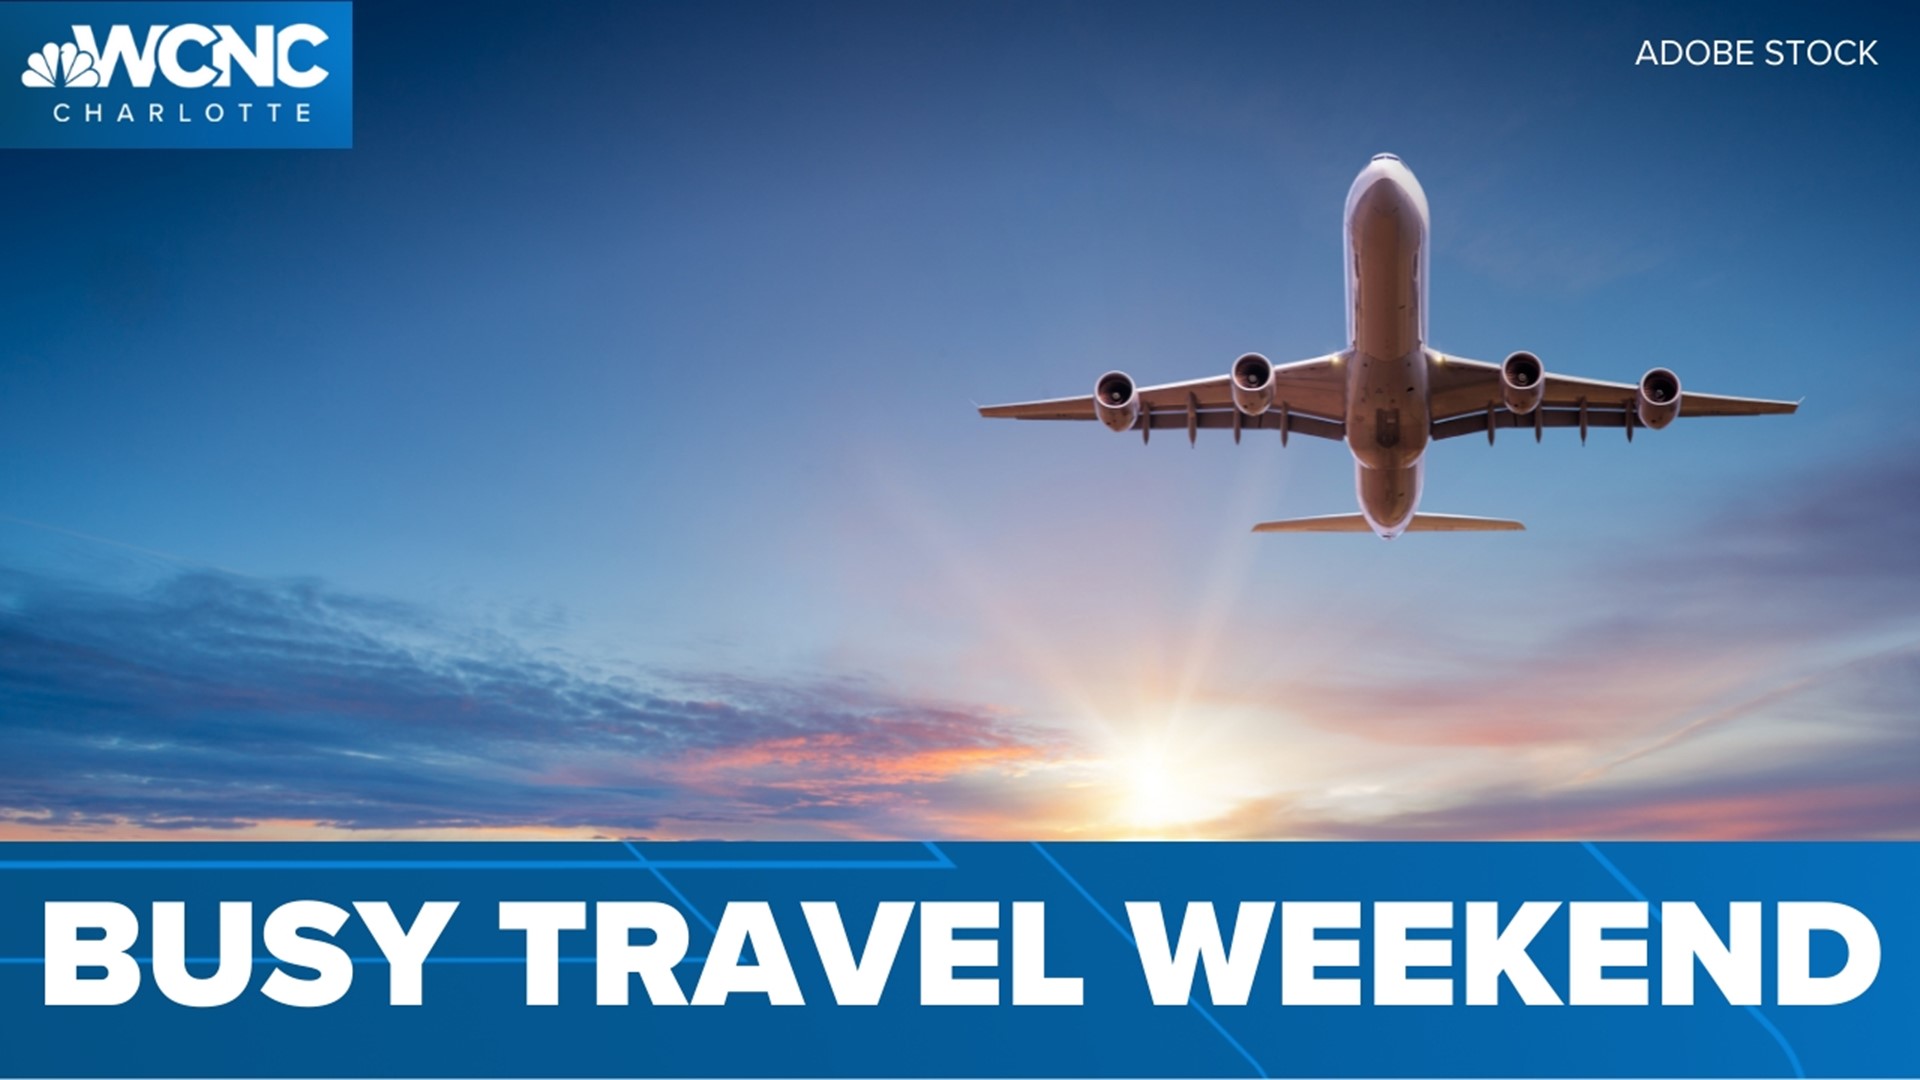 With plenty of people traveling for the holiday weekend, travelers are encouraged to arrive early and keep an eye on their flight status.